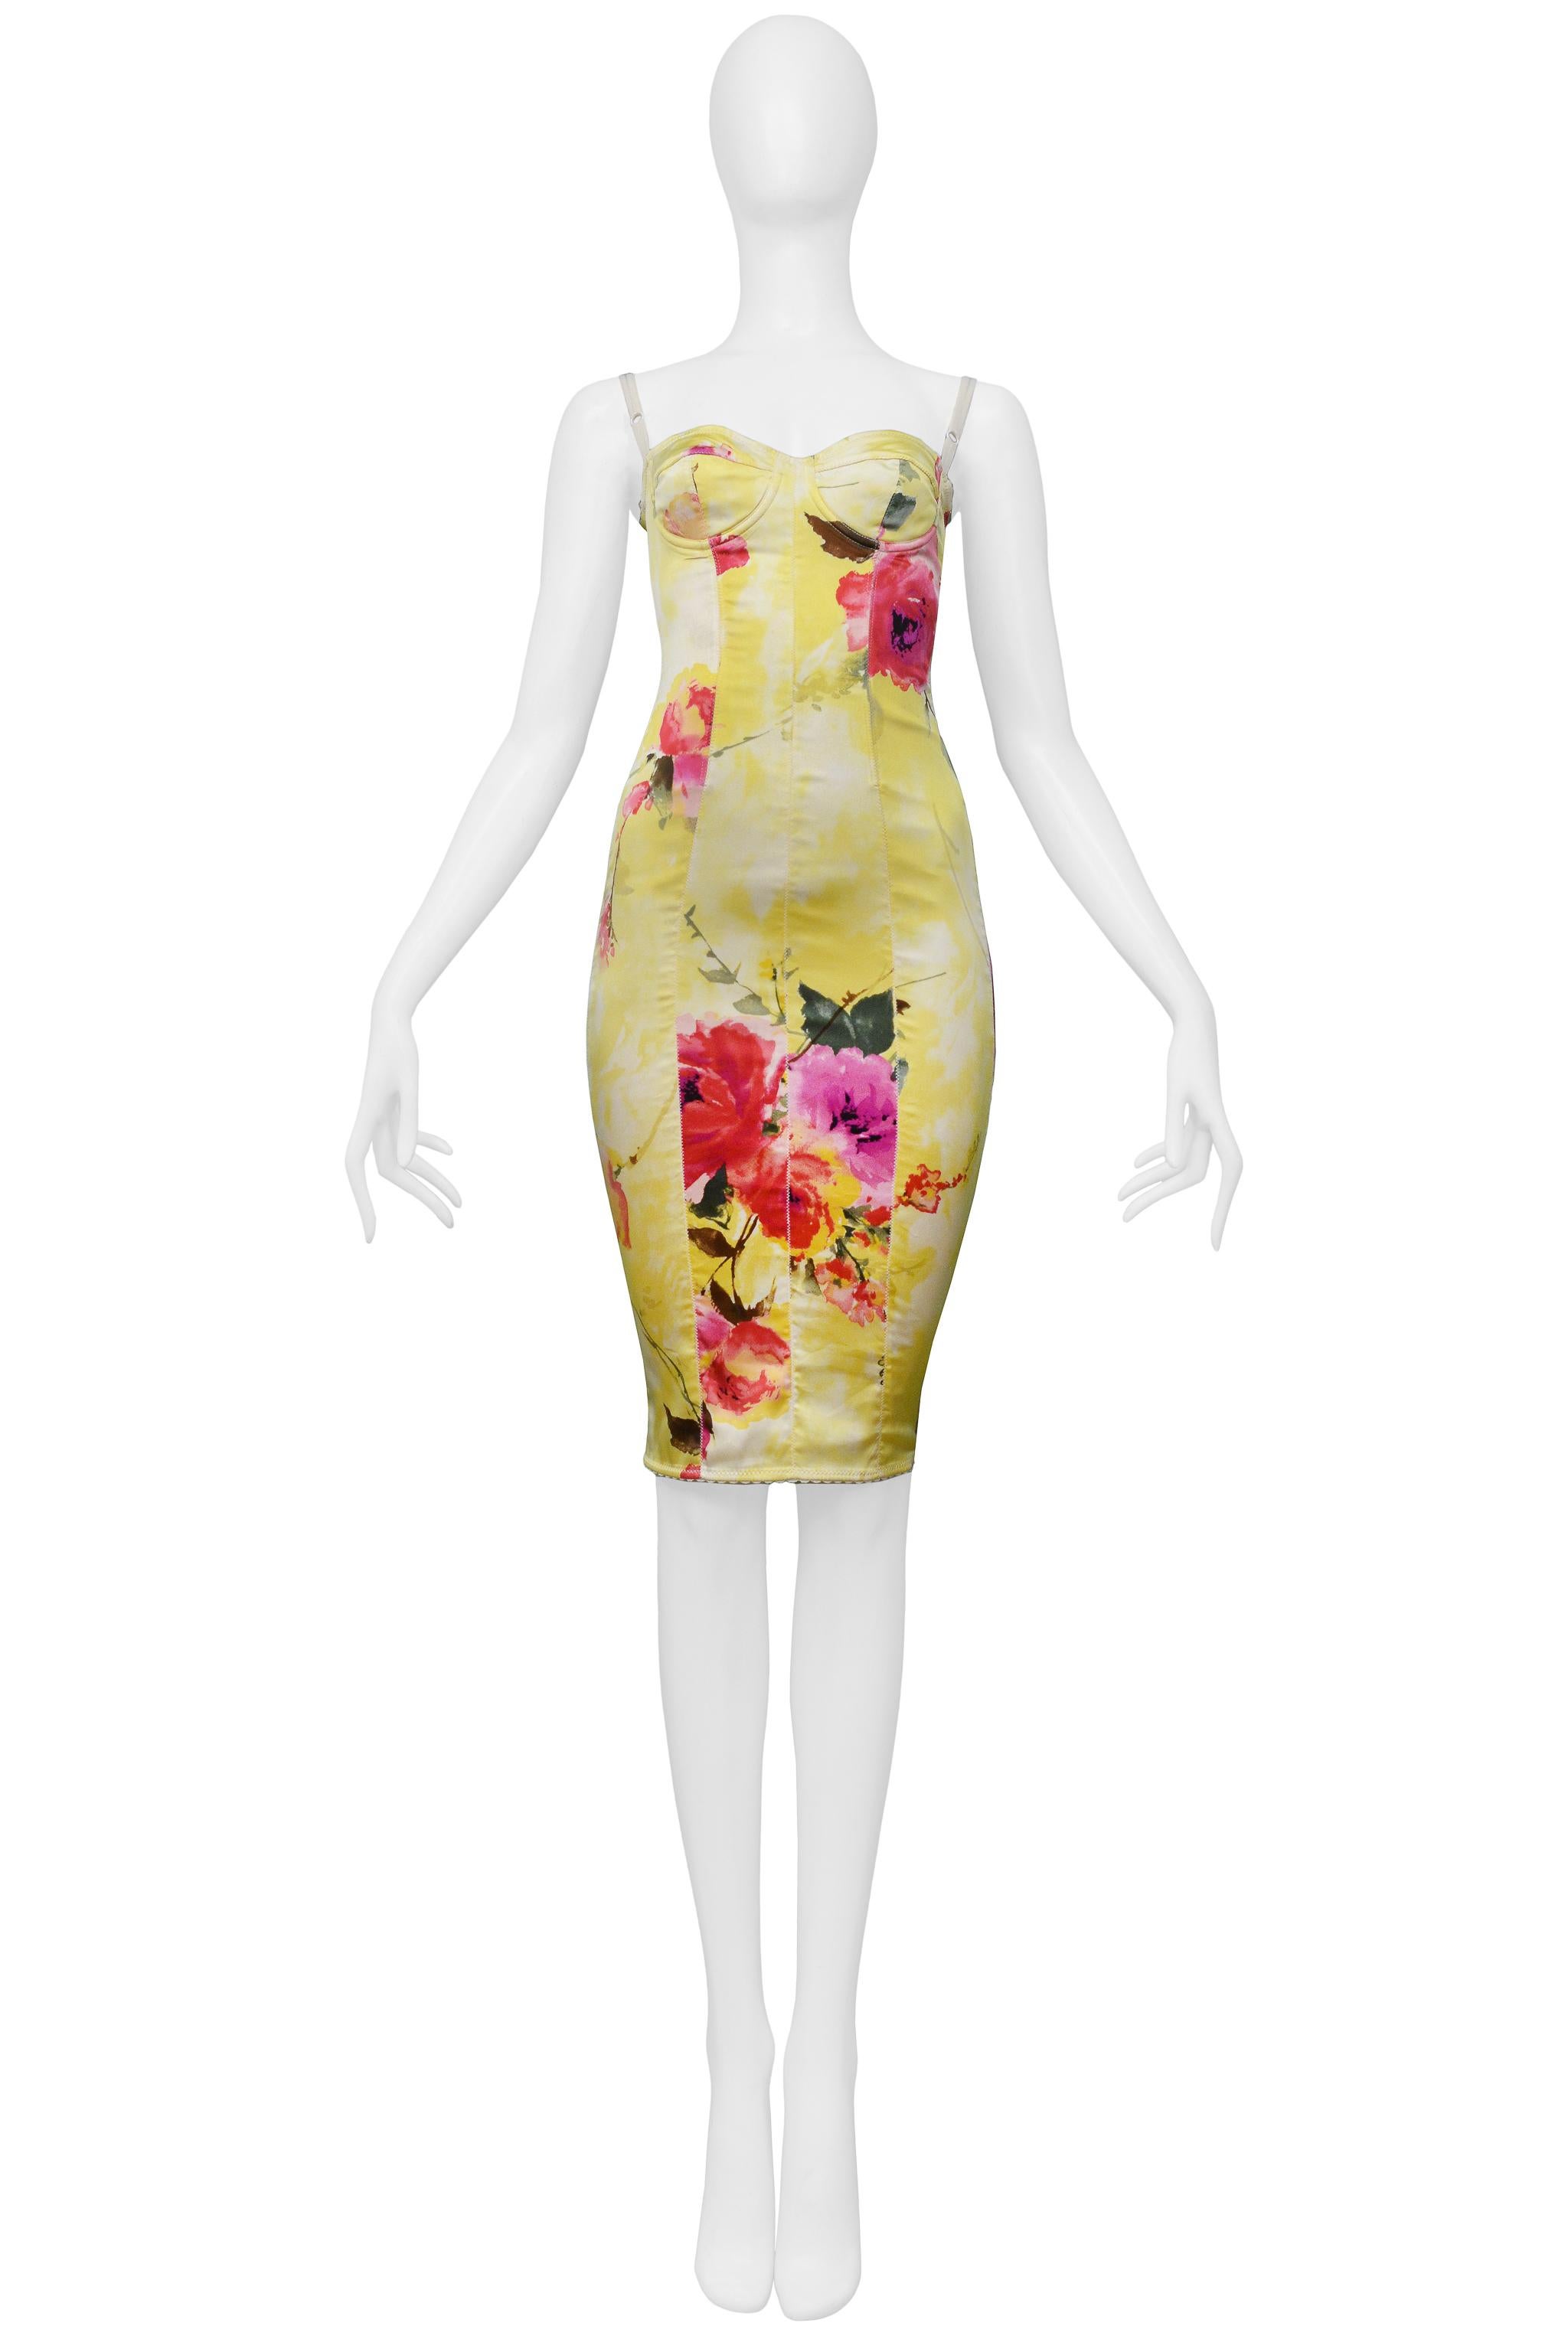 Resurrection Vintage is excited to offer a vintage Dolce & Gabbana yellow stretch satin body-con bustier dress featuring a pink and red floral print, off-white adjustable straps, fitted body, hook and eye center back closure. 

Dolce & Gabbana
Size